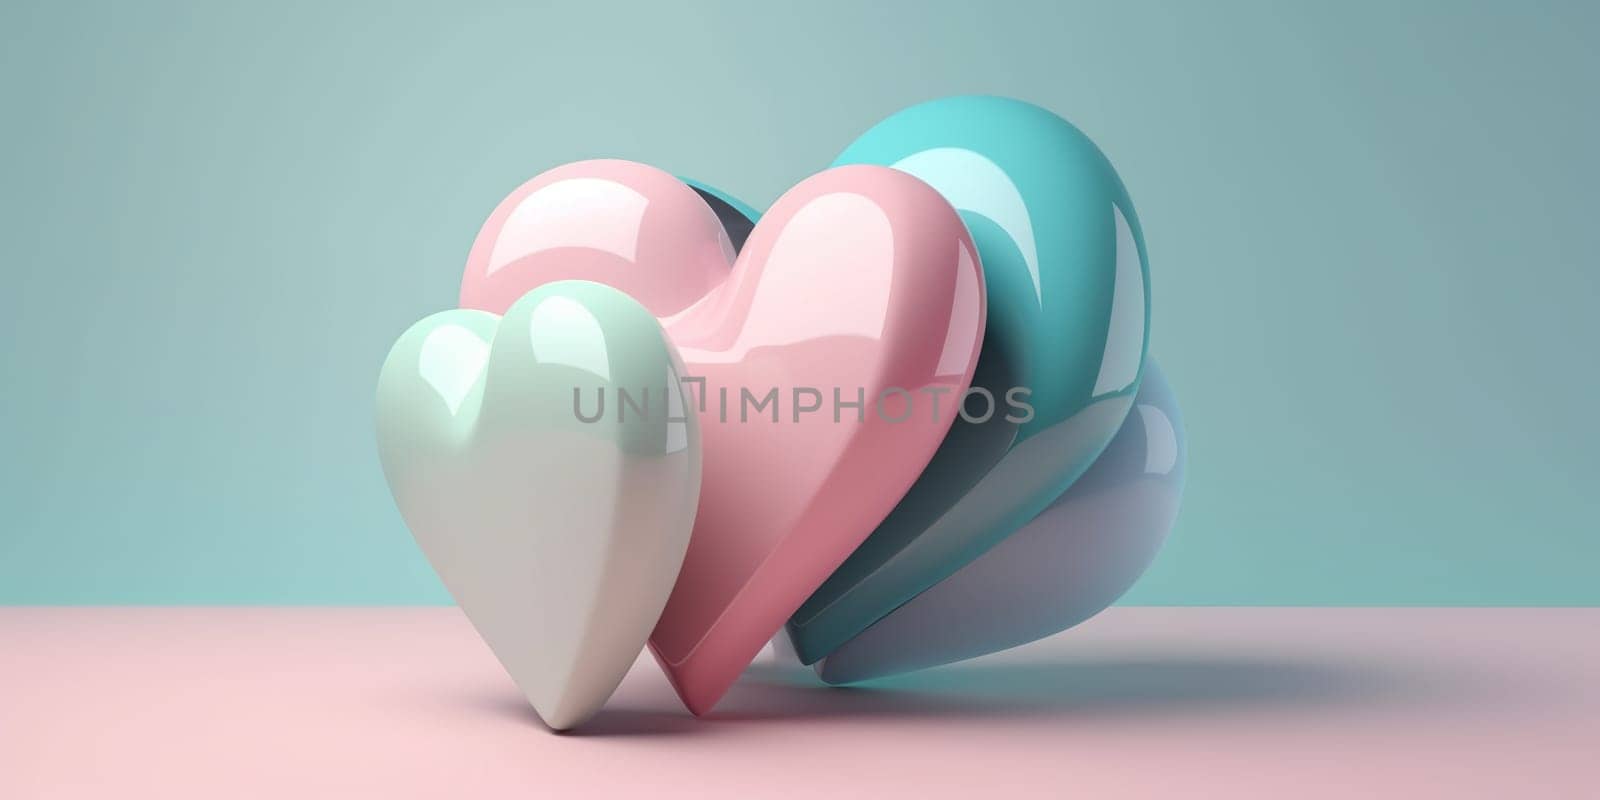 3D Illustration Hearts In Pastel Colors , Concept Of Love